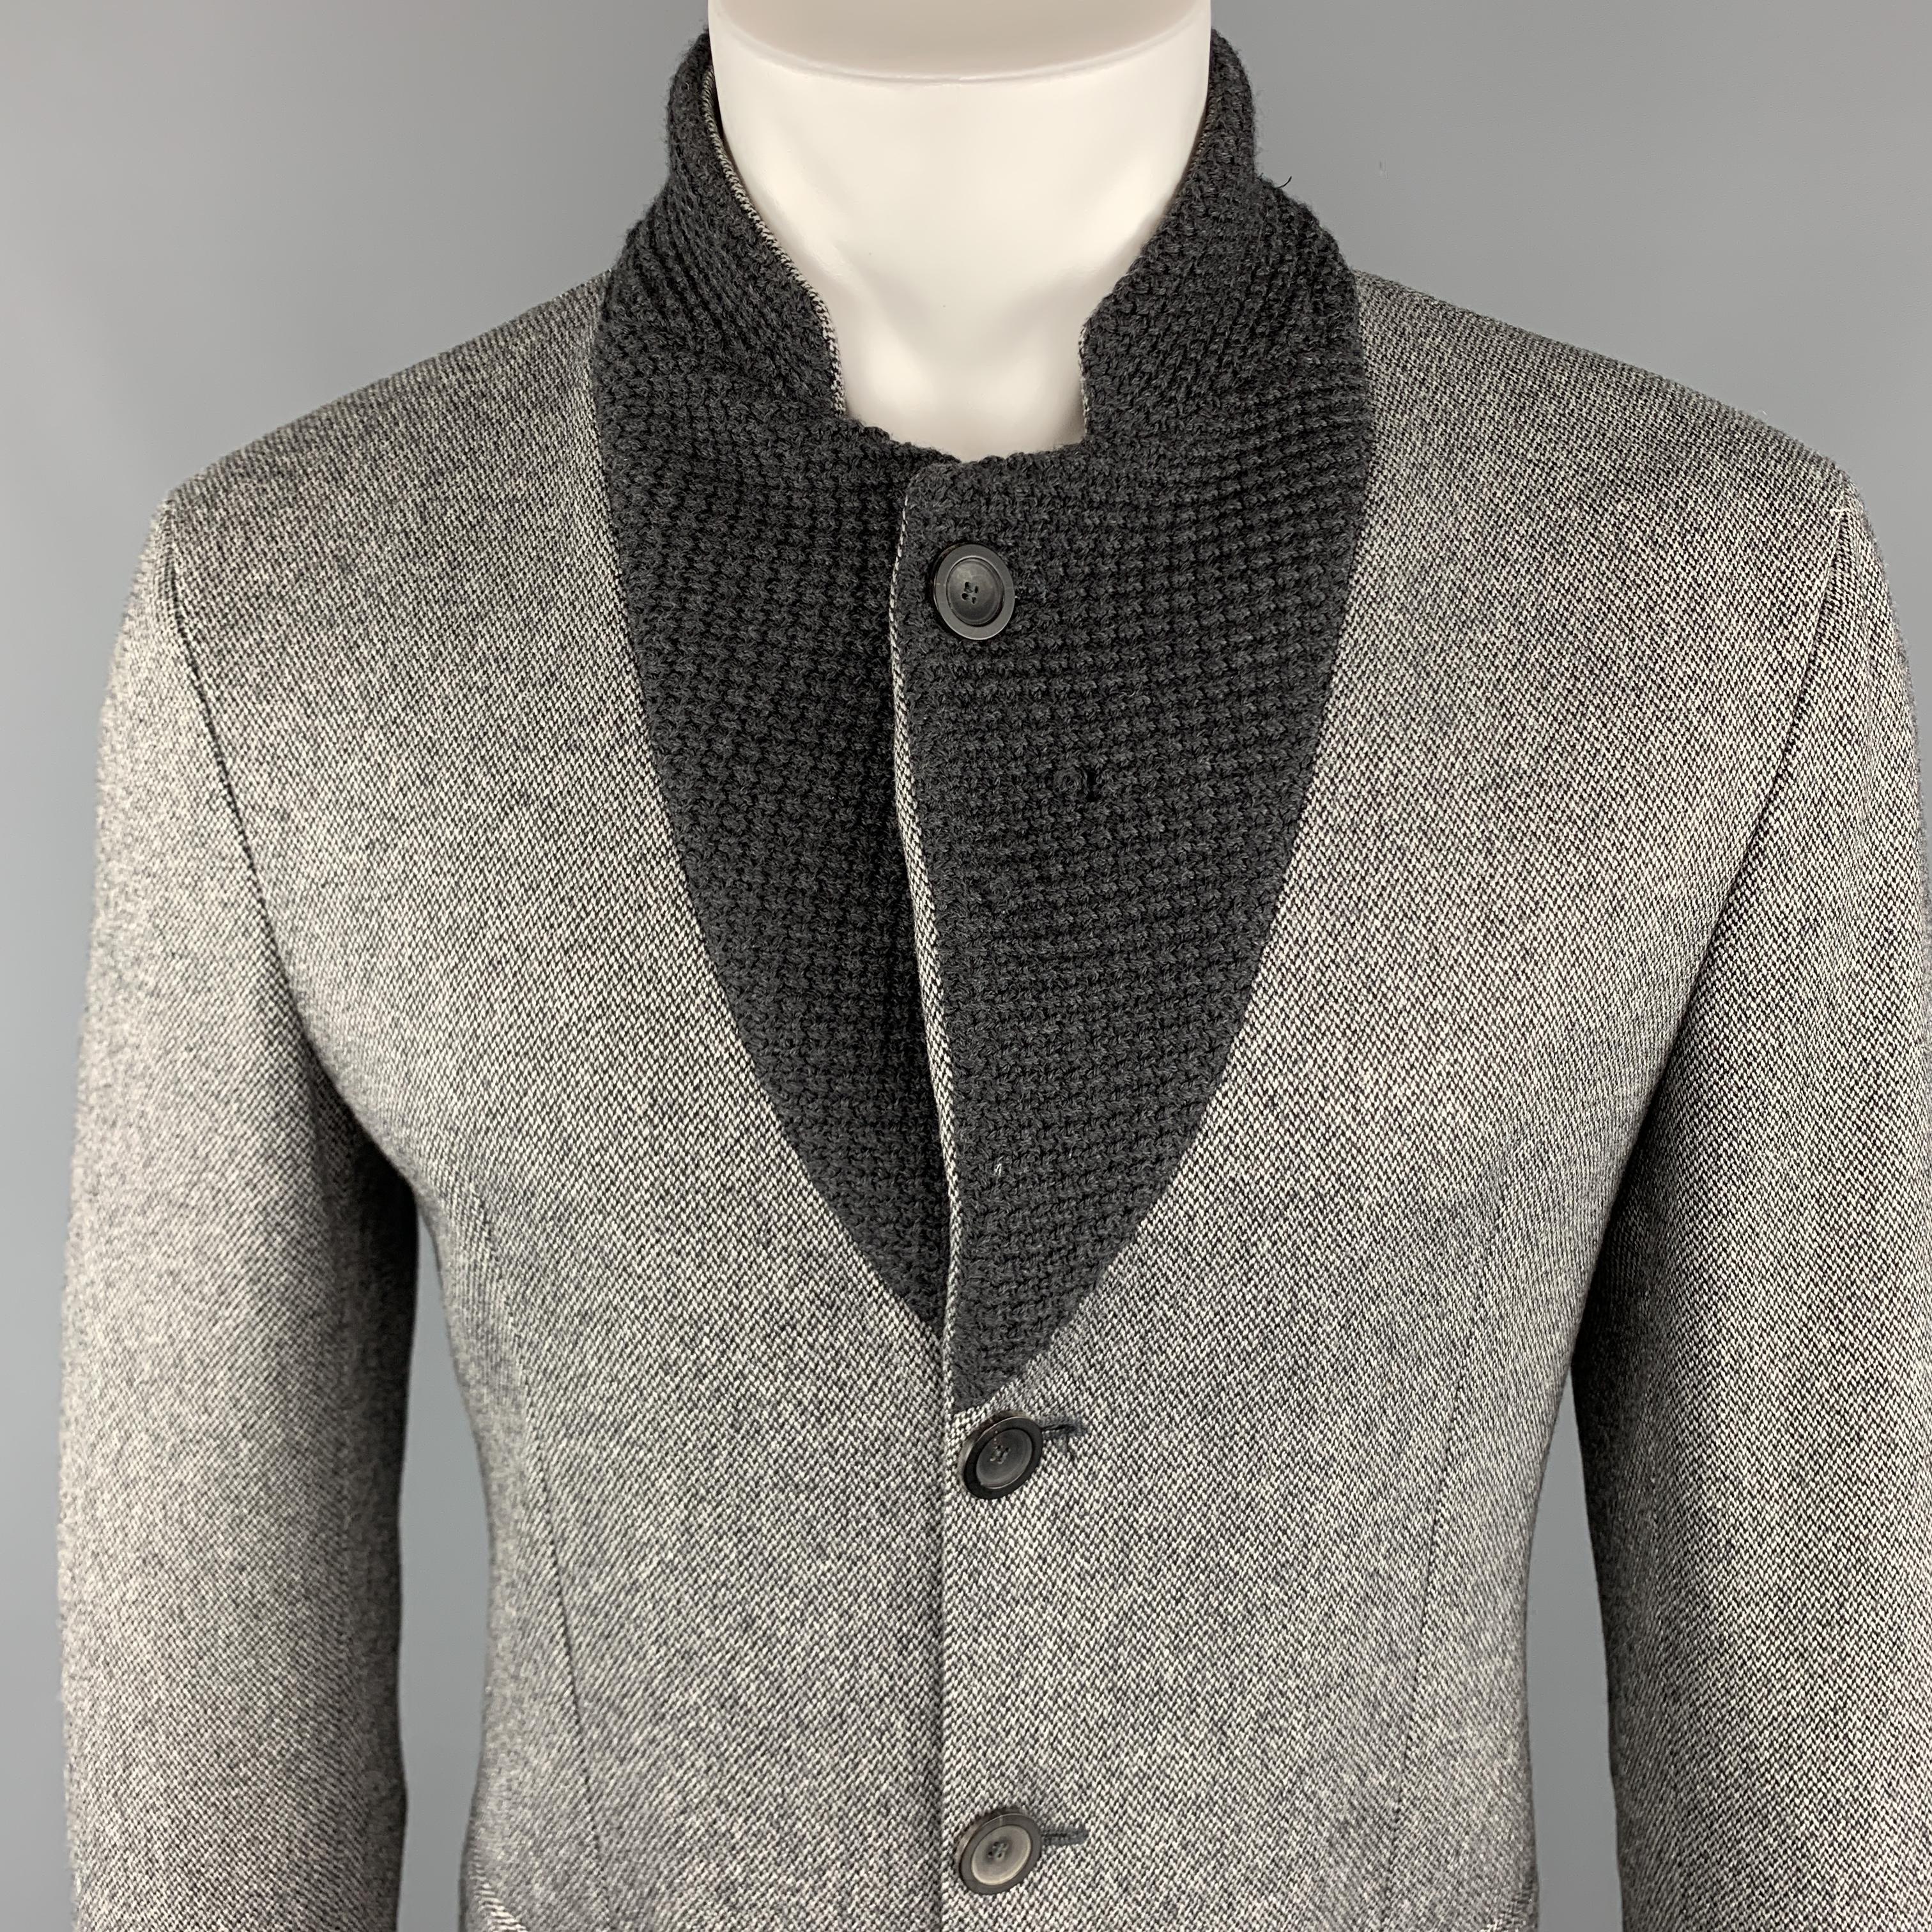 EMPORIO ARMANI MR A Line Jacket comes in a gray tone in a heather wool blend material, with a notch knitted lapel, slit pockets, 3/4 buttons at closure, single breasted, unbuttoned cuffs. Minor tear at knit inside lapel. Made in Italy.

Very Good